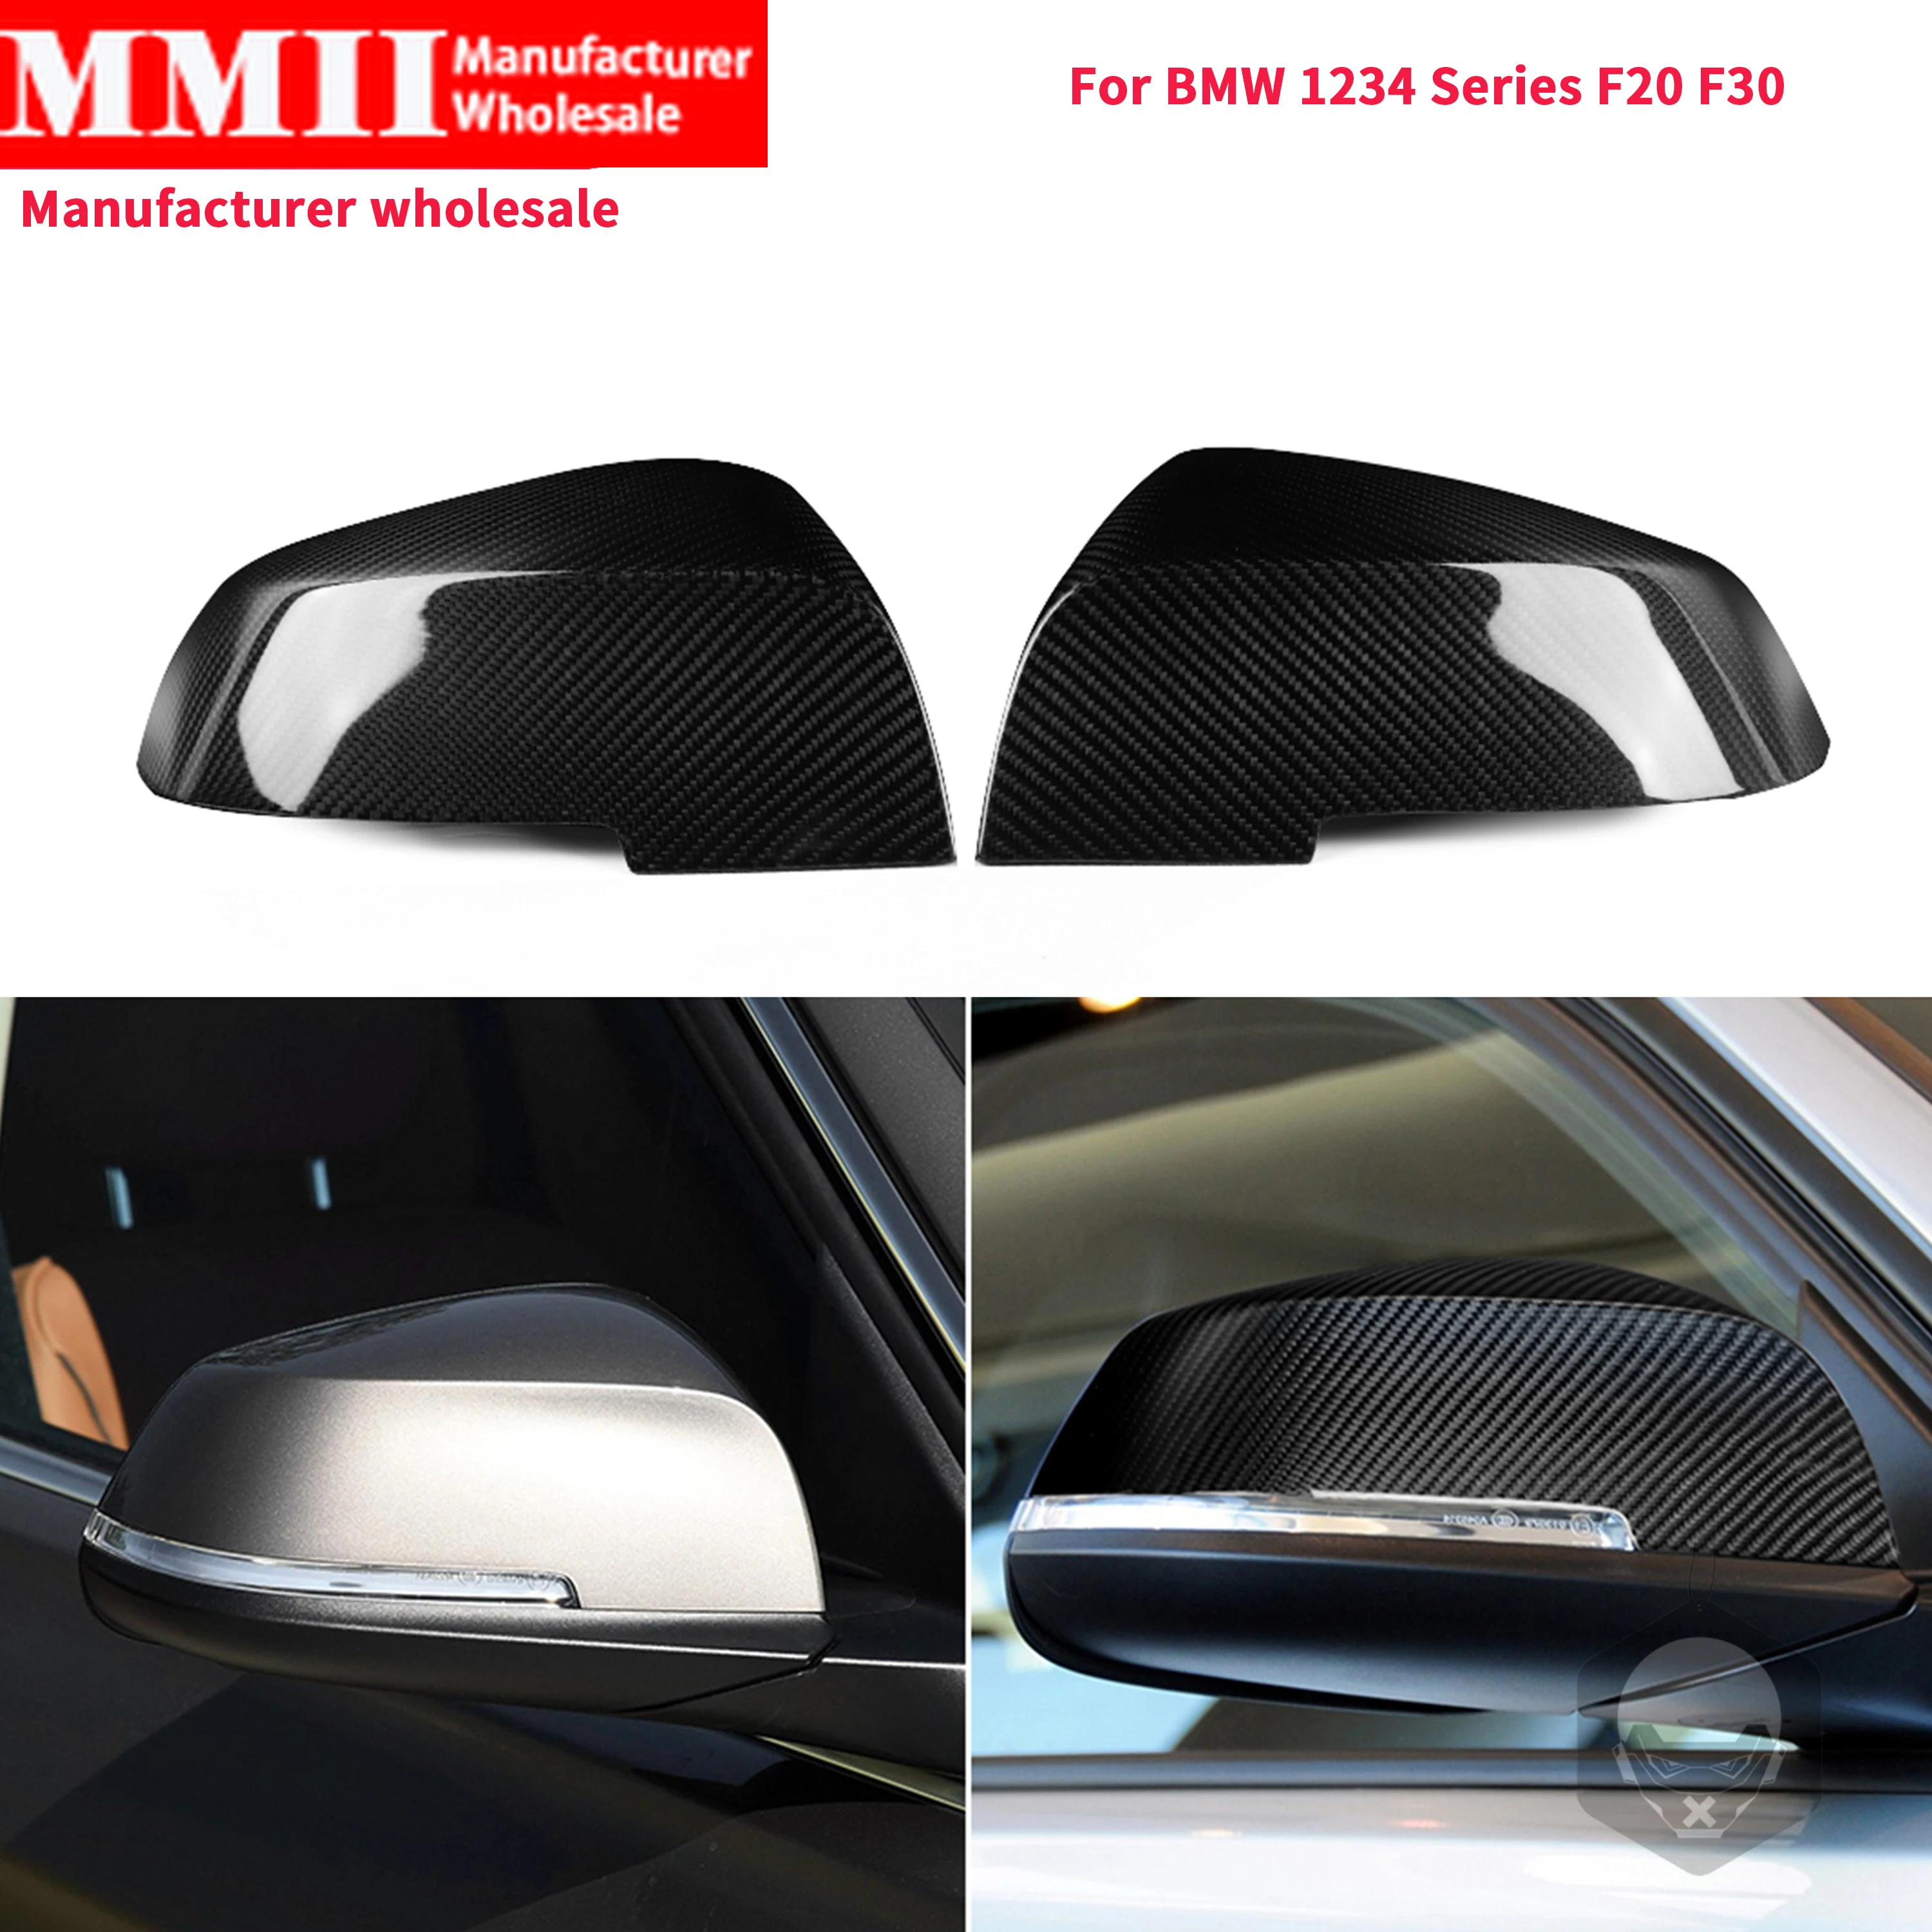 

1 Pair For BMW 1 2 3 4 Series F20 F30 Side Mirror Cover Caps Dry Carbon Fiber Rearview Mirror Trim Protection Shells Add On Kit